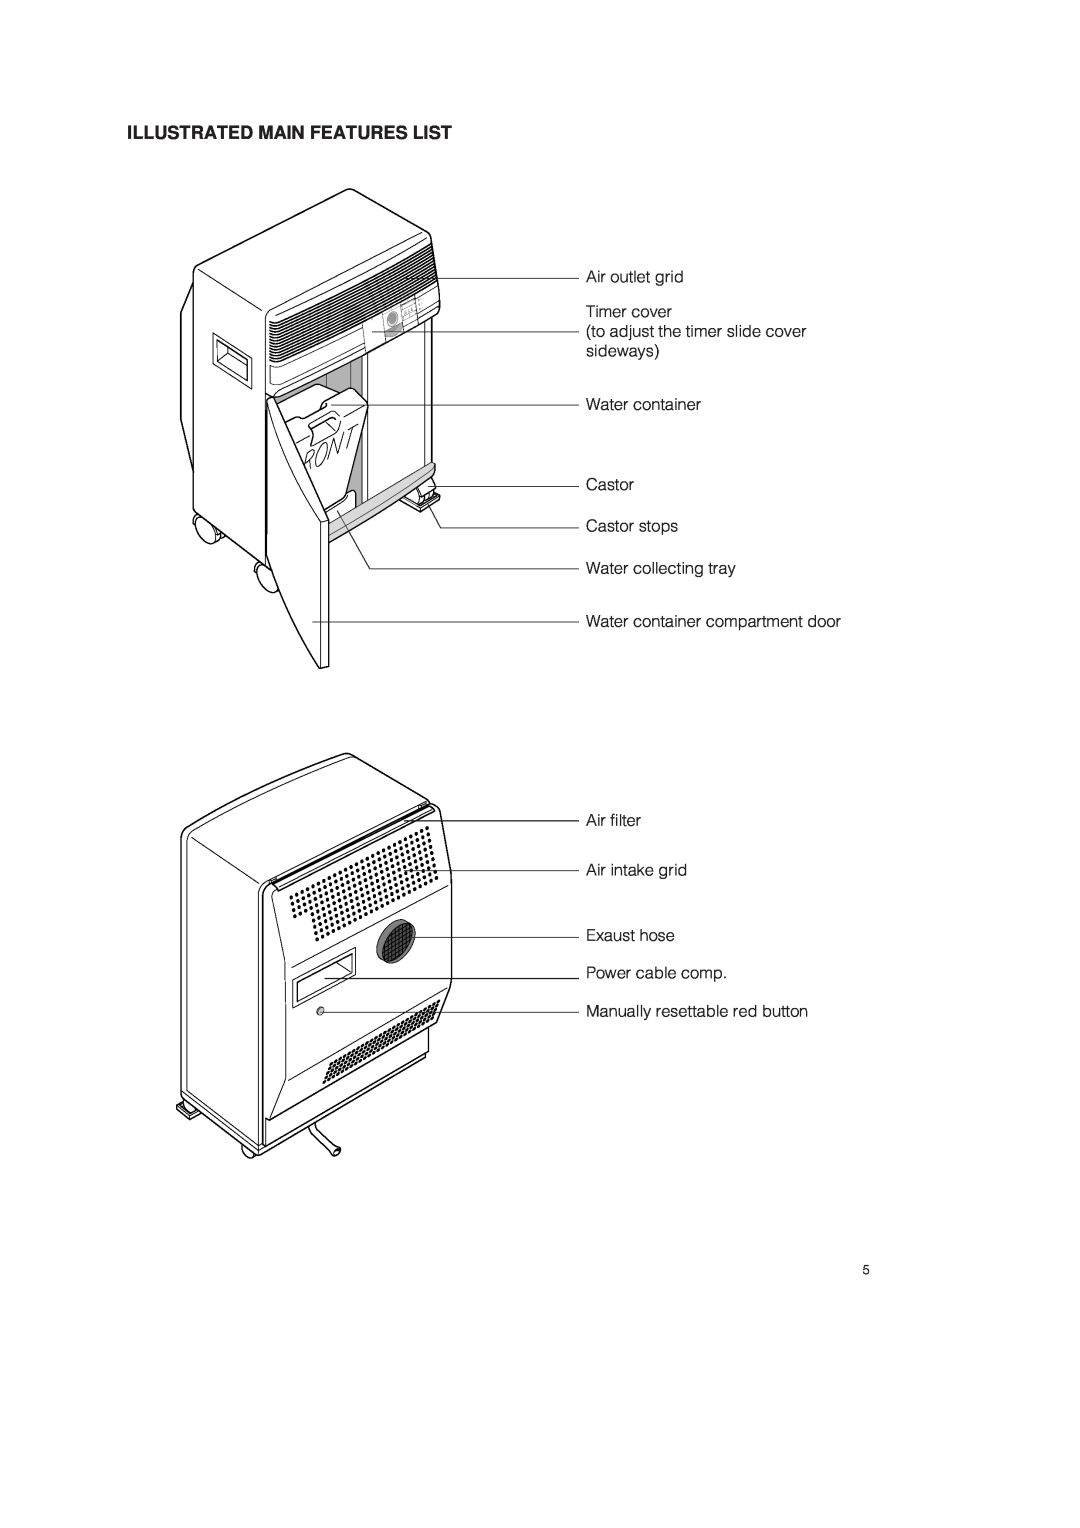 DeLonghi PAC 250 U Illustrated Main Features List, Air outlet grid Timer cover, to adjust the timer slide cover sideways 